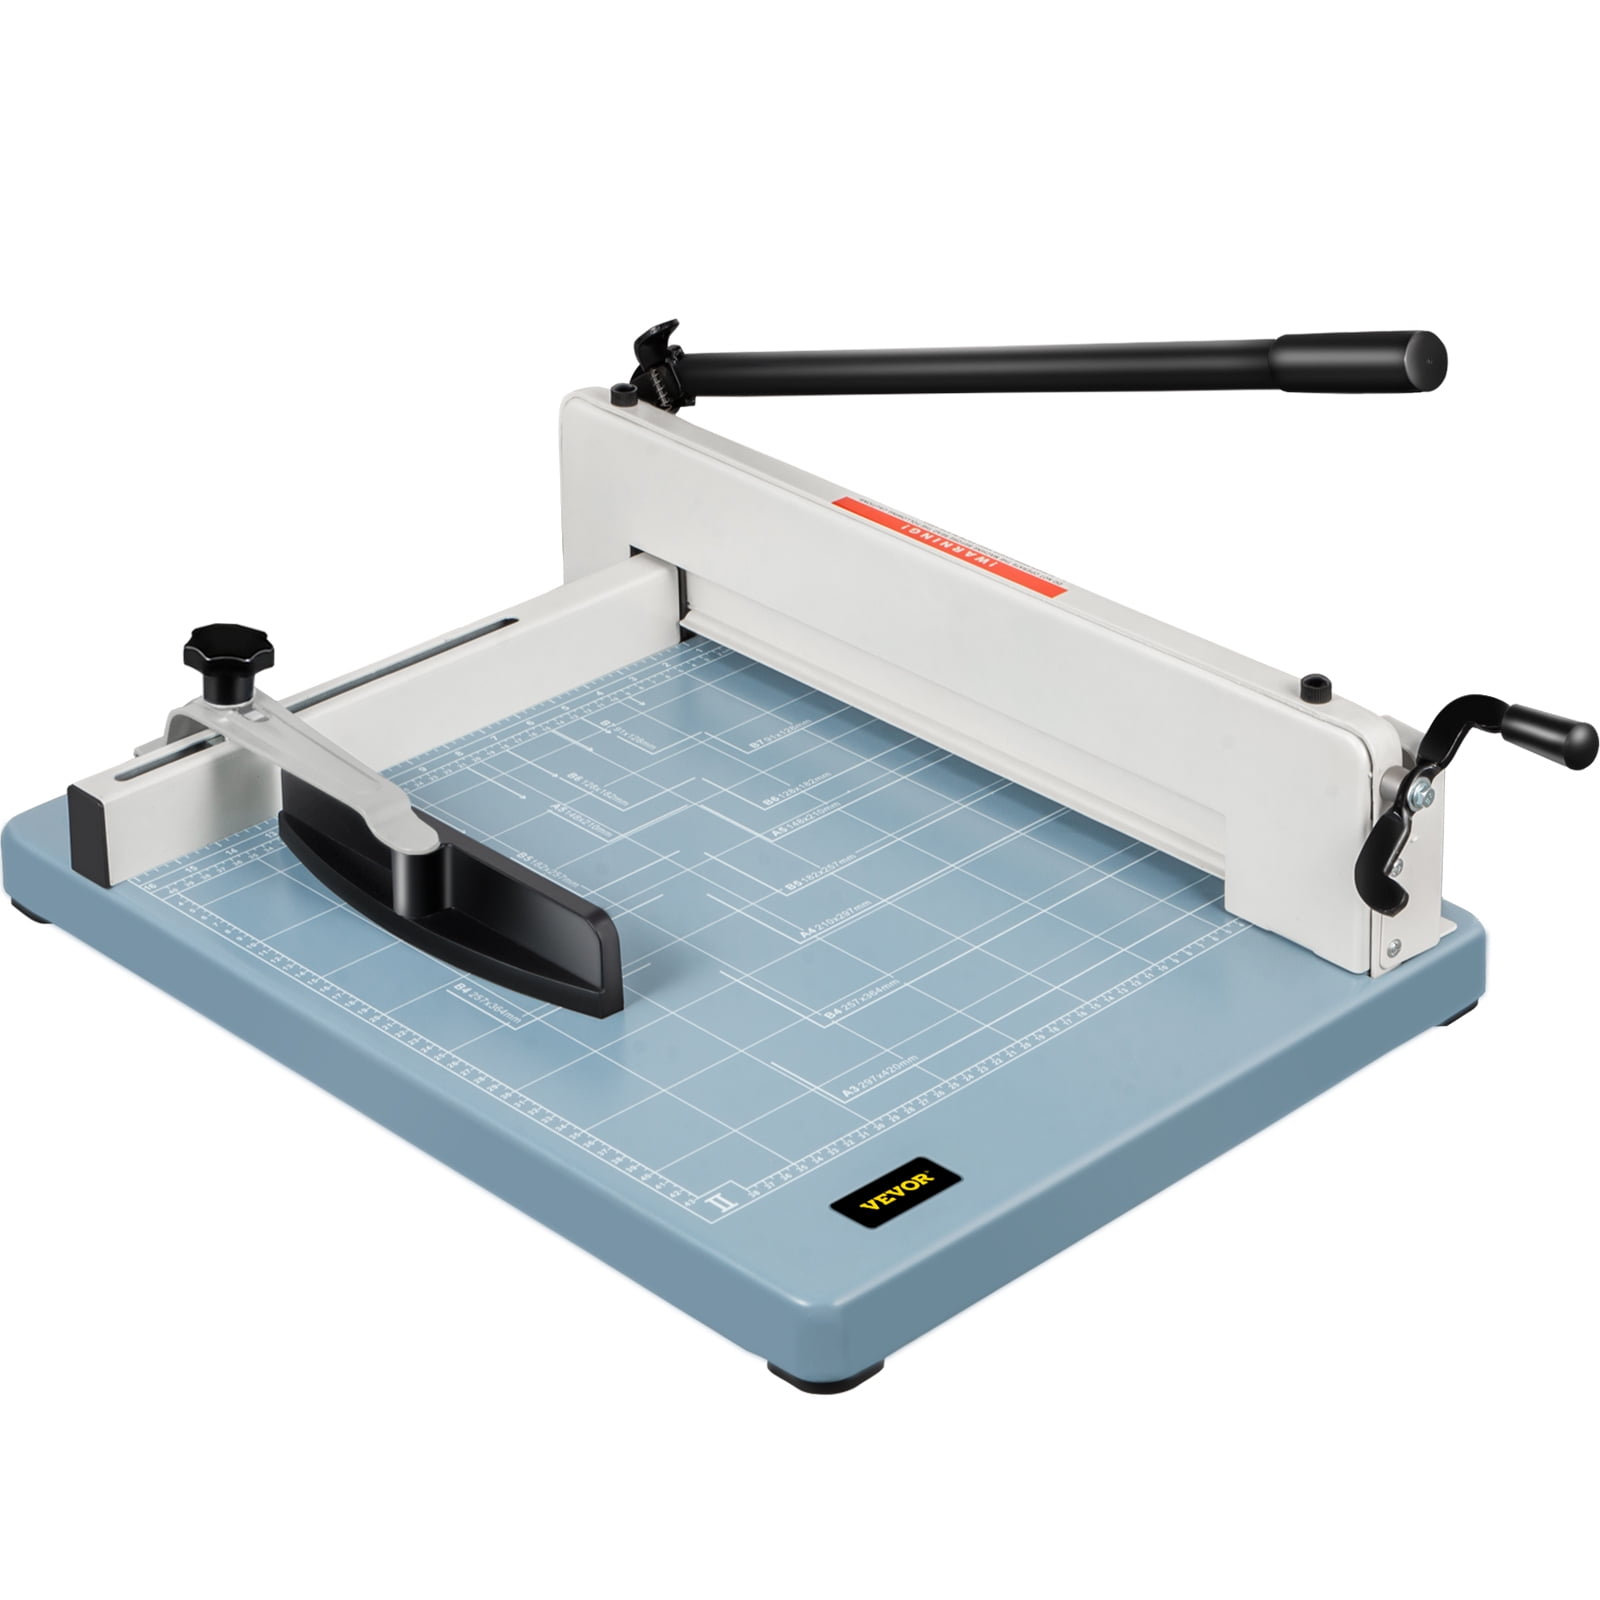 Details about   Paper Cutter A3-B7 Metal Base Guillotine Page Trimmer Machine For Home e 17 